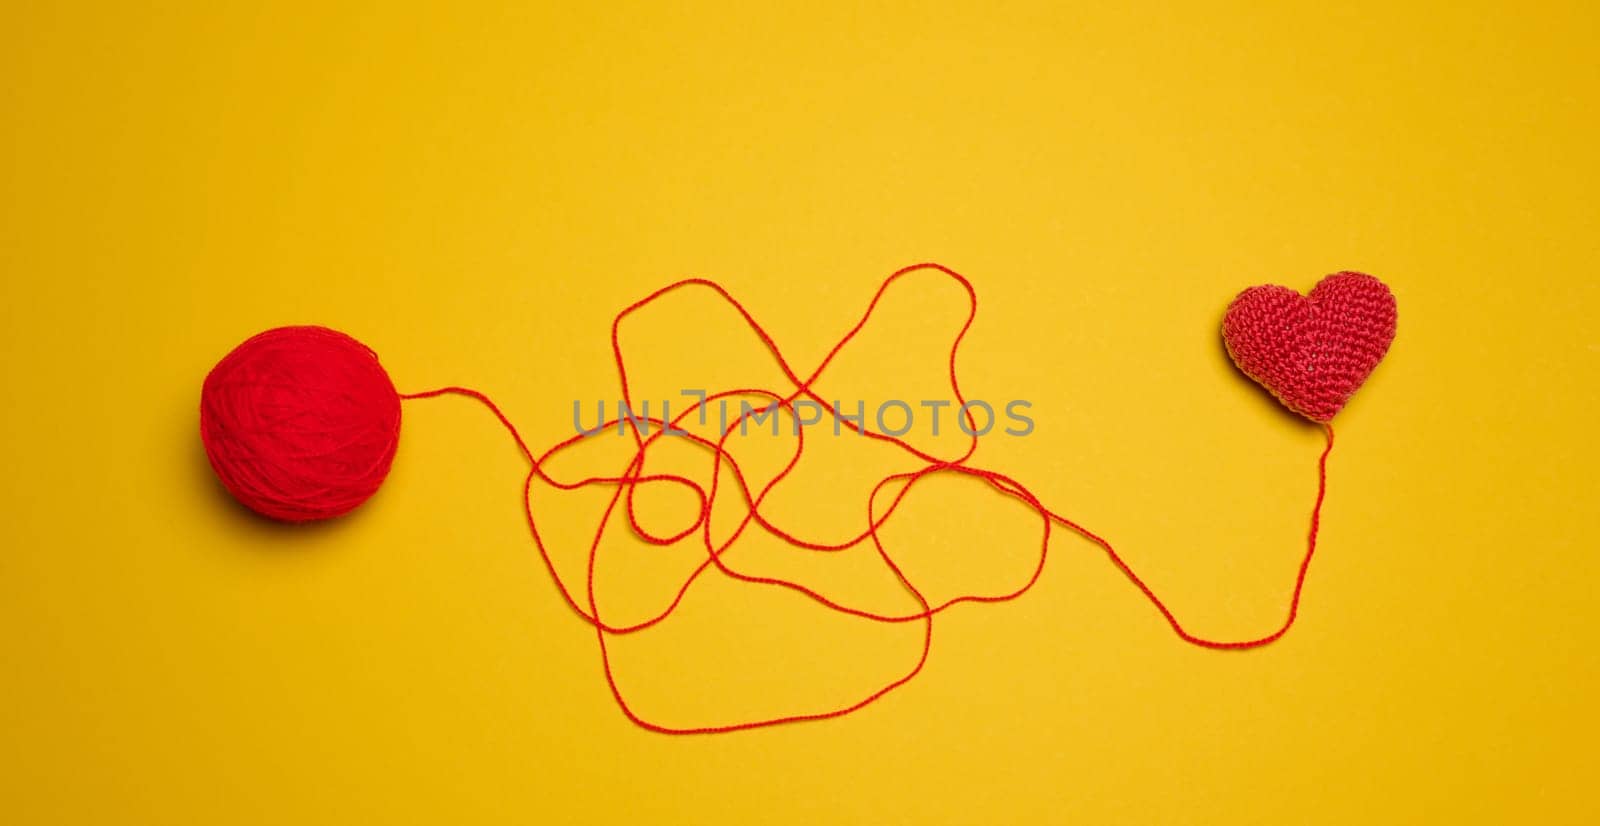 A ball of thread and a knitted red heart on a yellow background, top view by ndanko